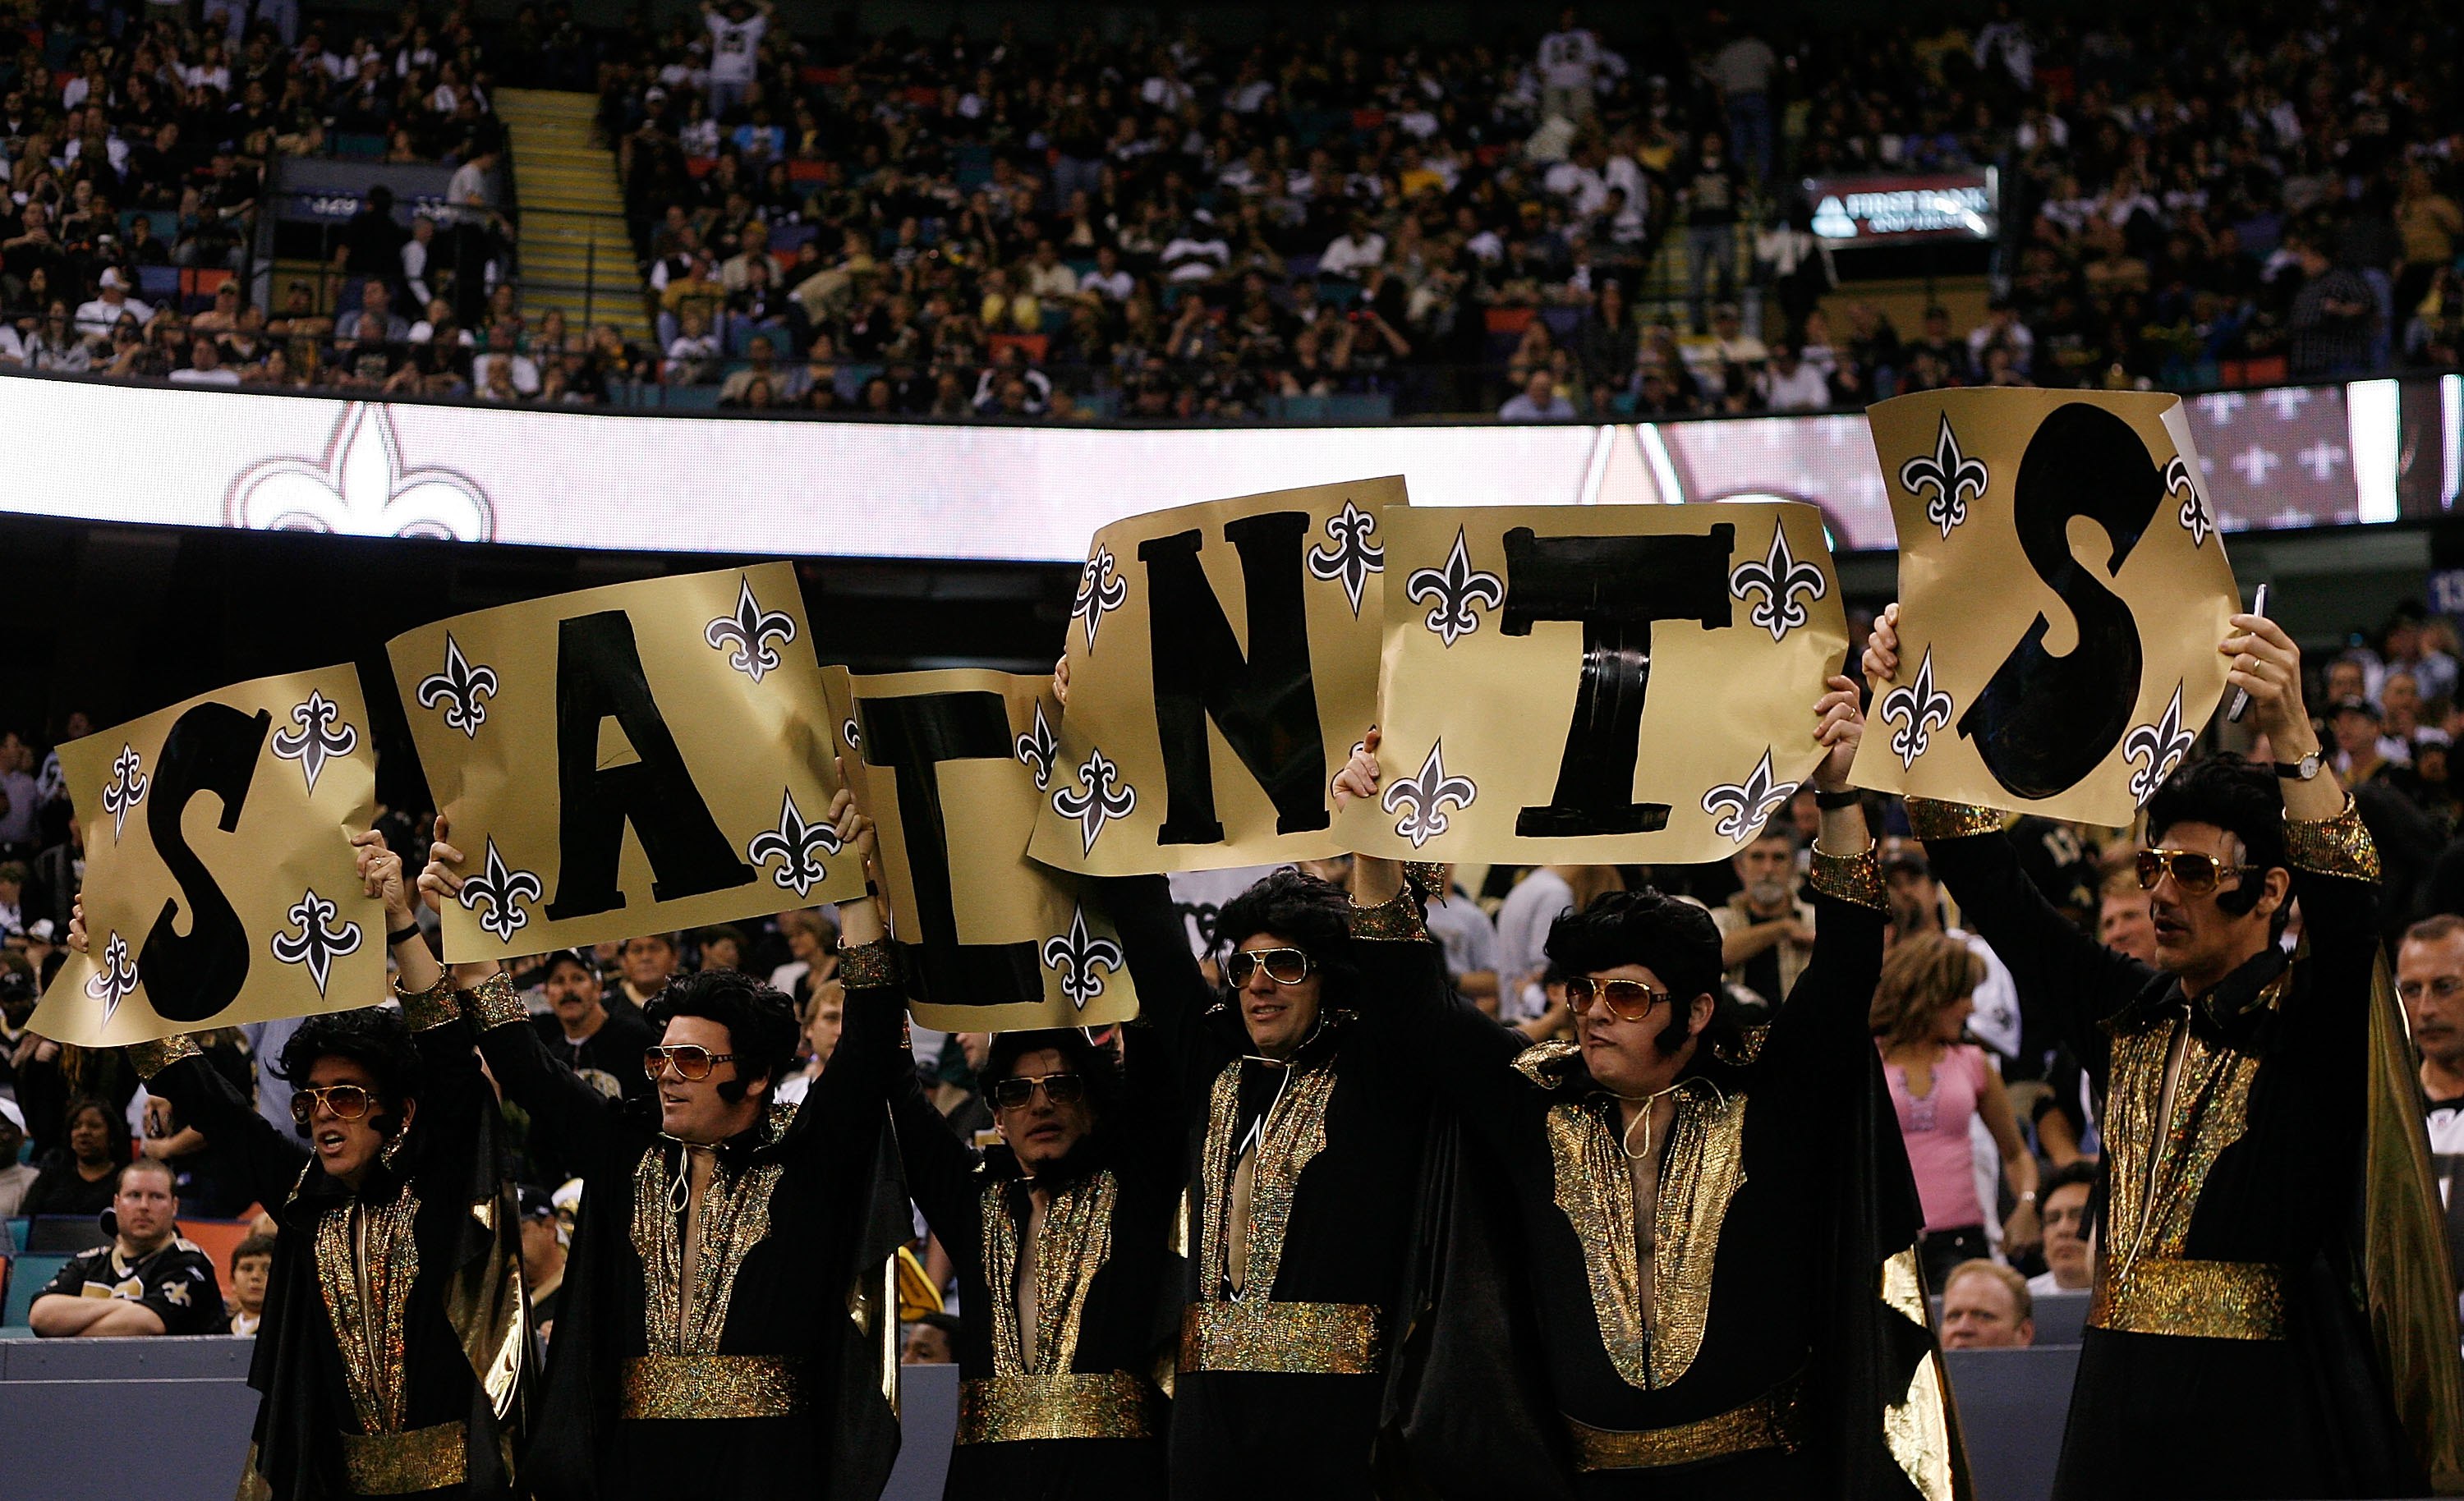 The New Orleans Saints Might Have Helped to Cover up an Unspeakable Crime